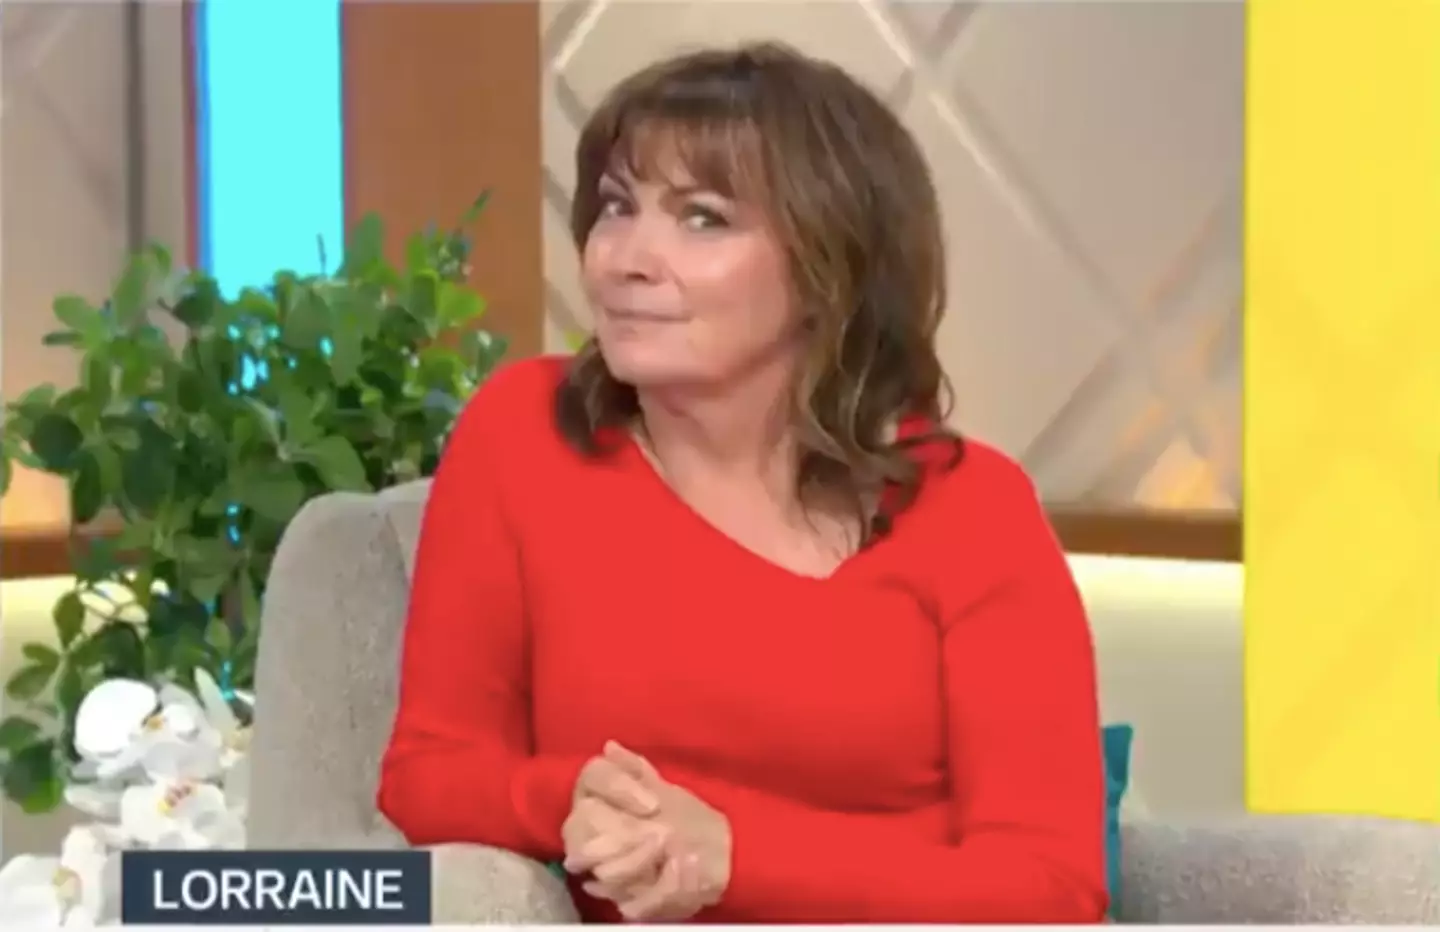 Lorraine broke the news that her interview with Ekin-Su had been cancelled.